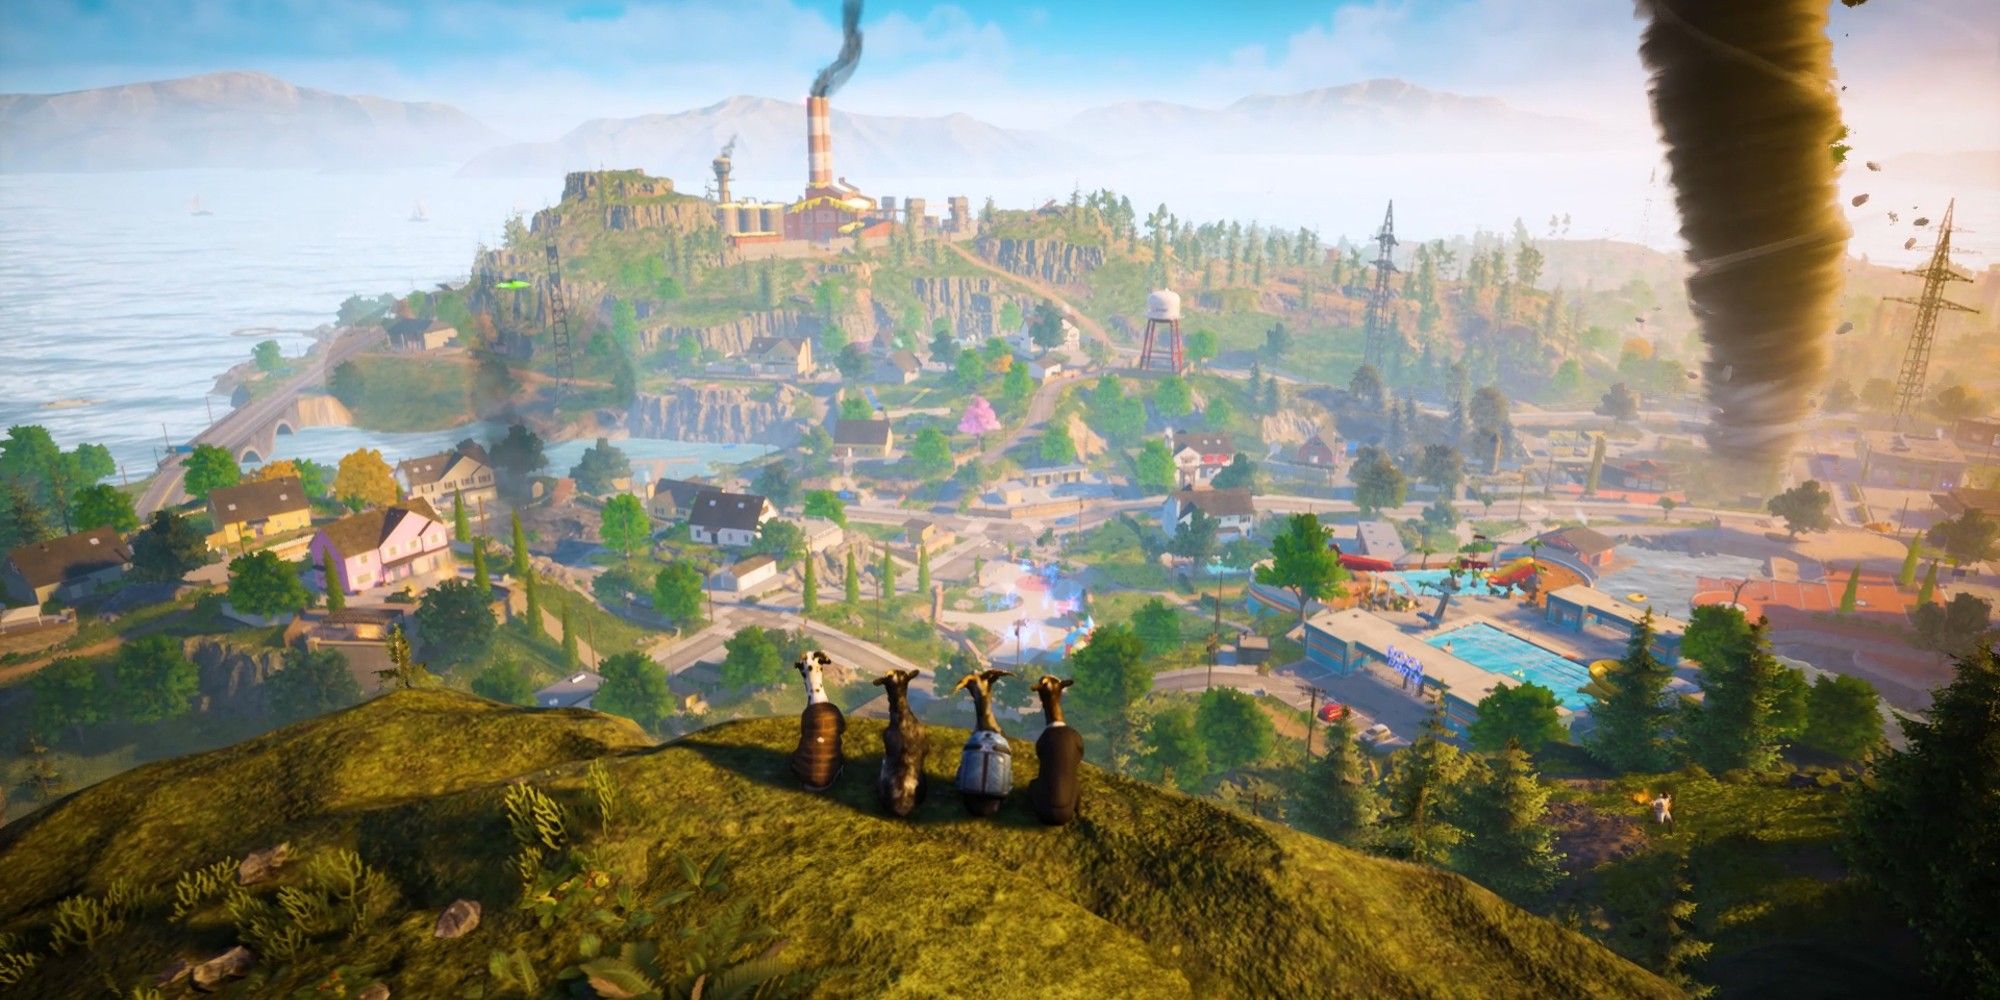 Four goats overlooking the city in Goat Simulator 3